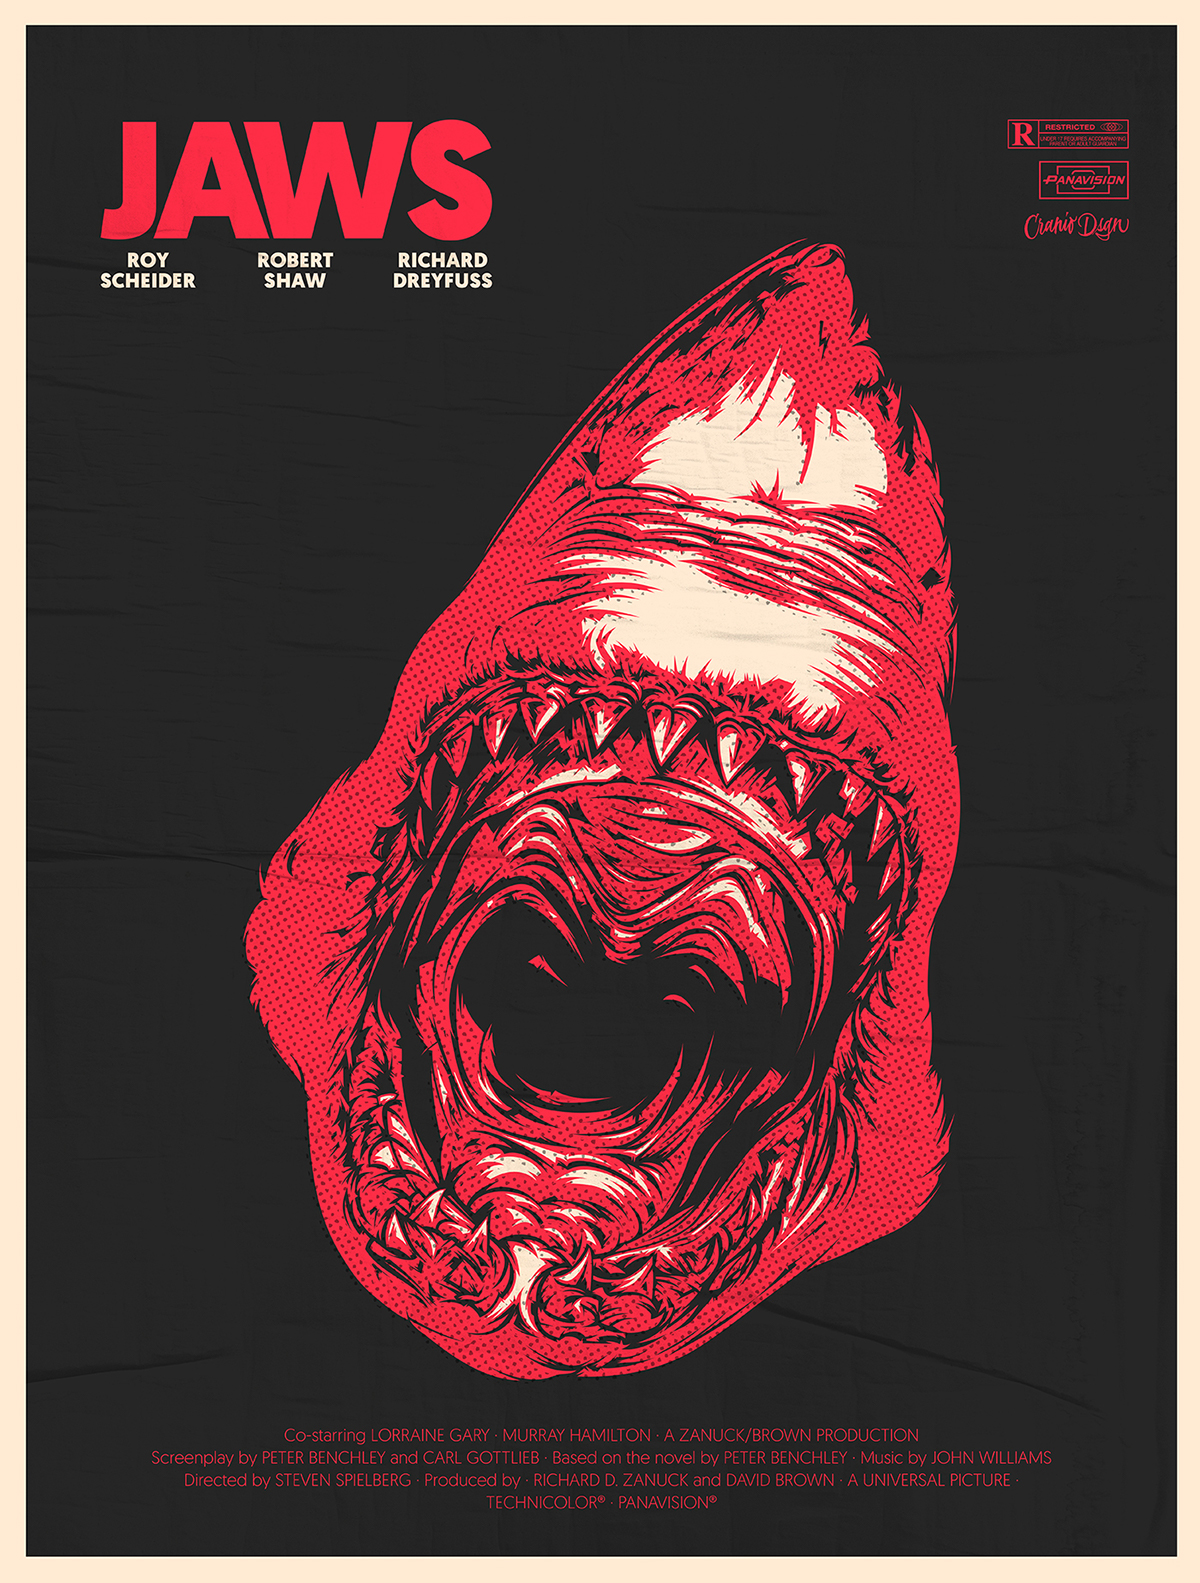 jaws Film movie horror shark Mouth poster.